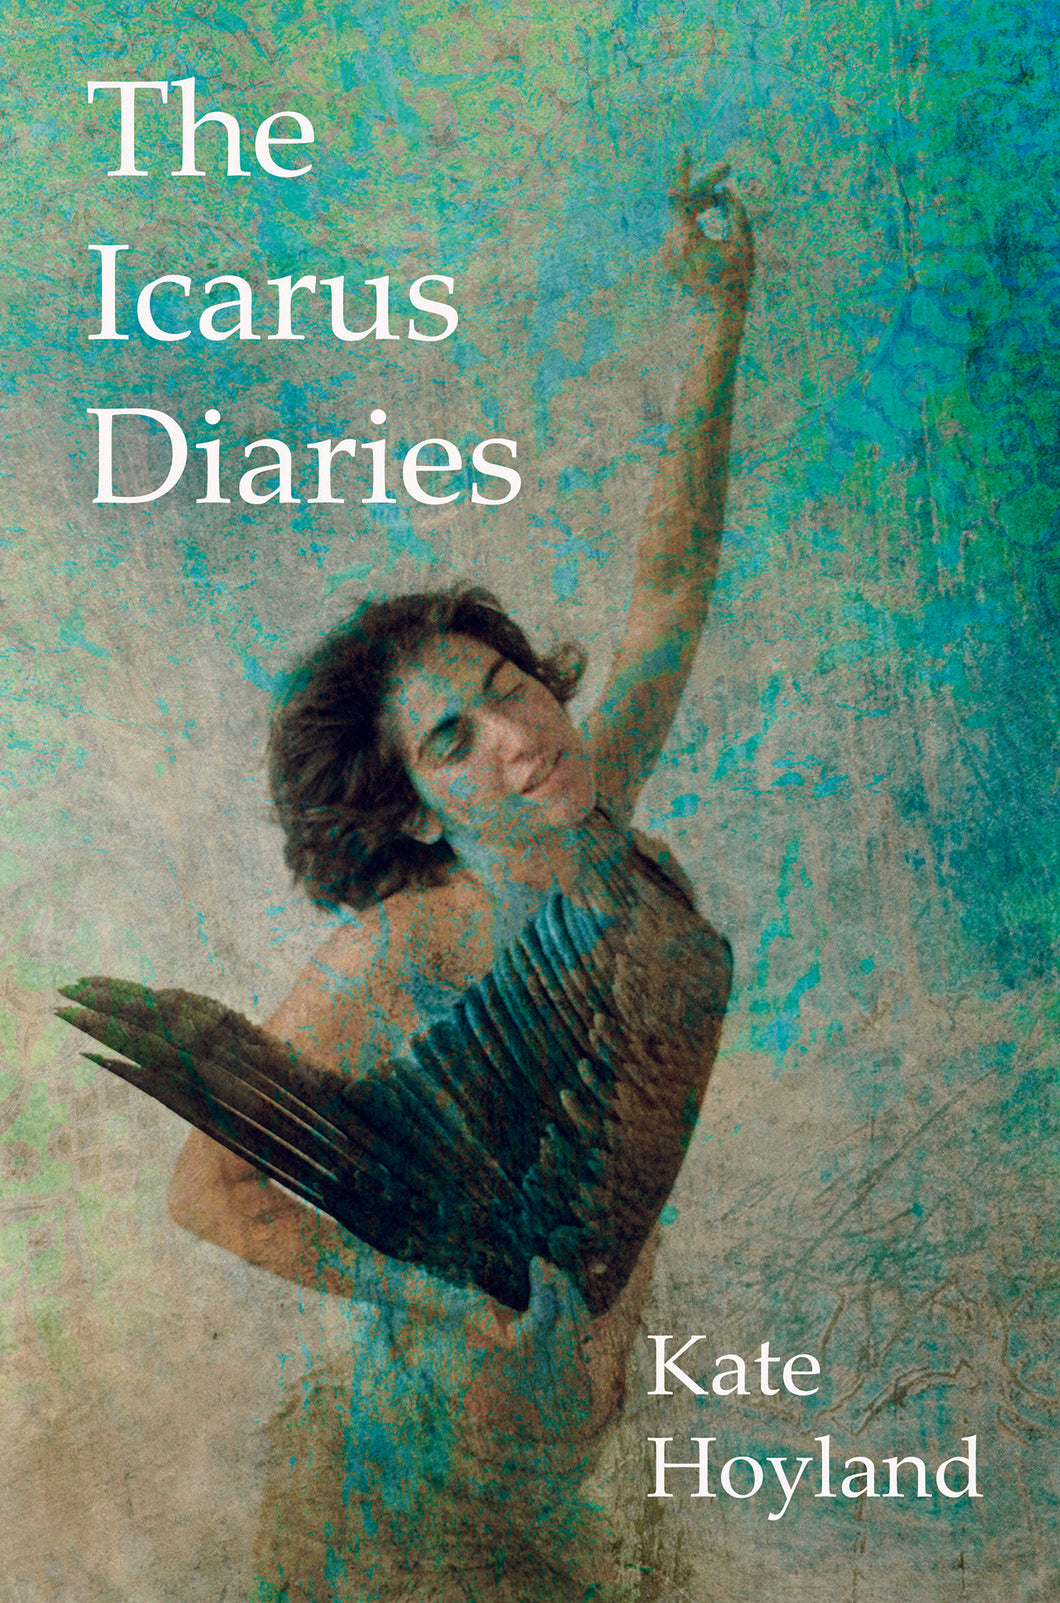 The Icarus Diaries